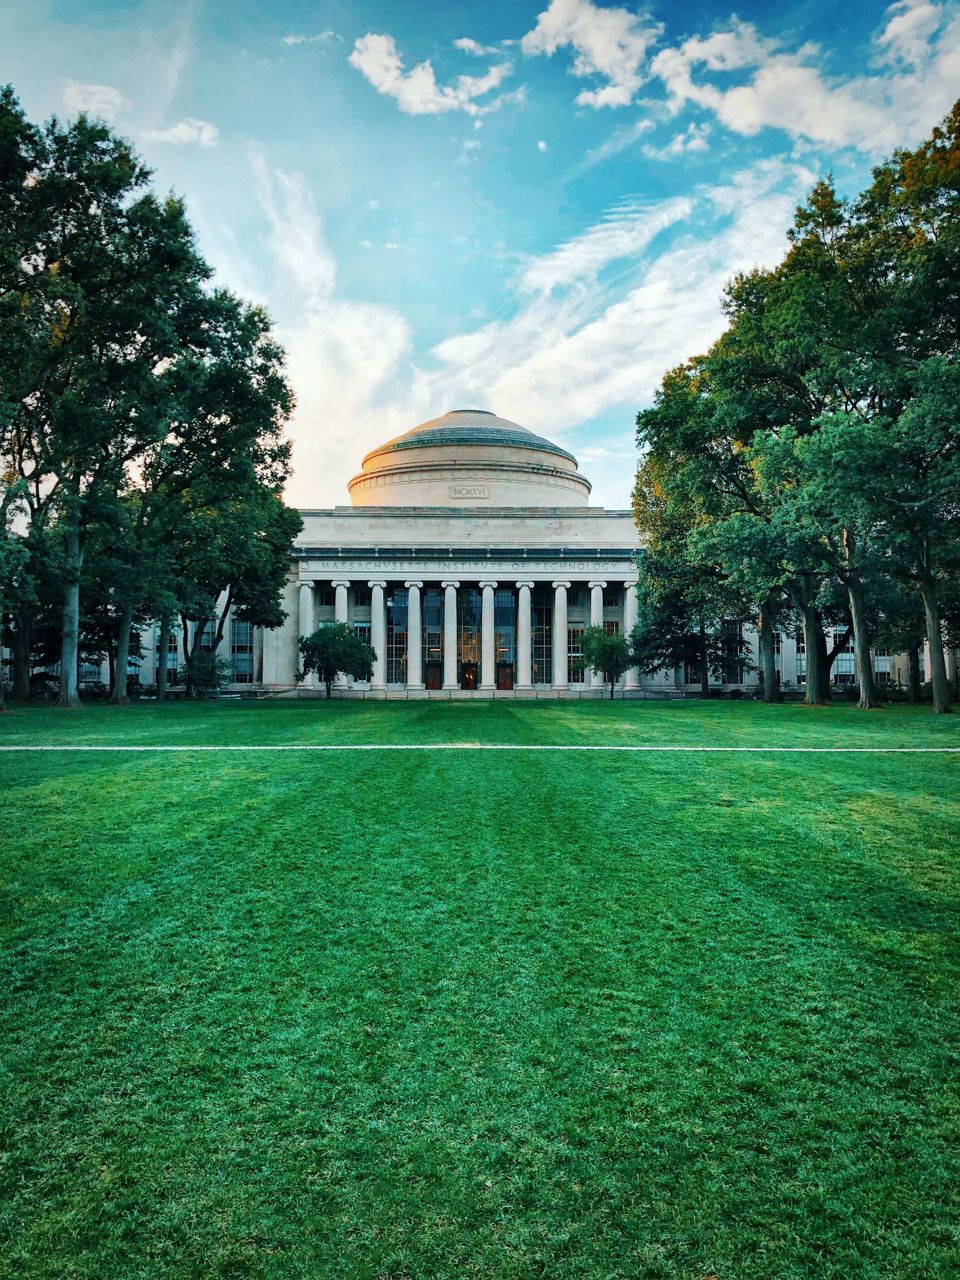 MIT now has a -4% acceptance rate [#38]